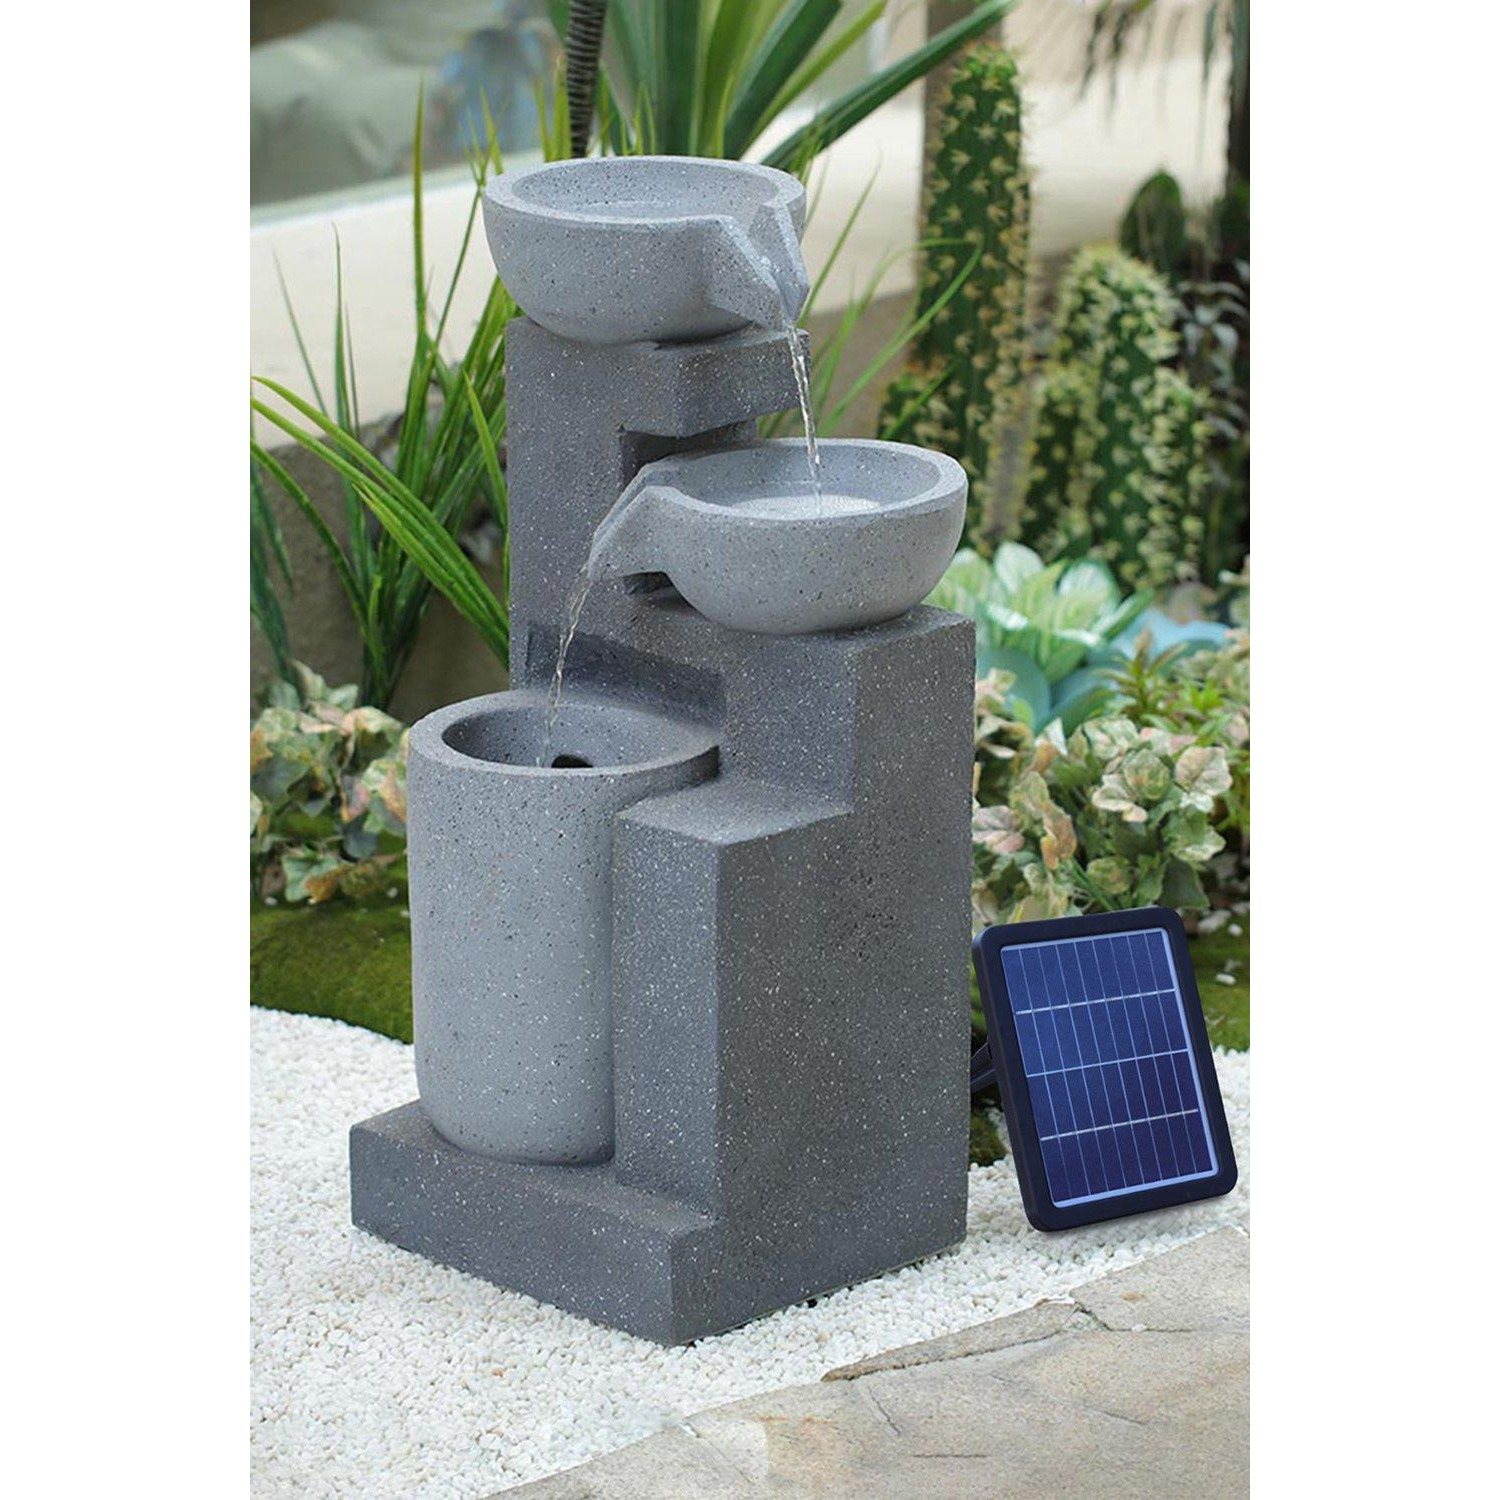 Creative Water Feature Outdoor Fountain - image 1